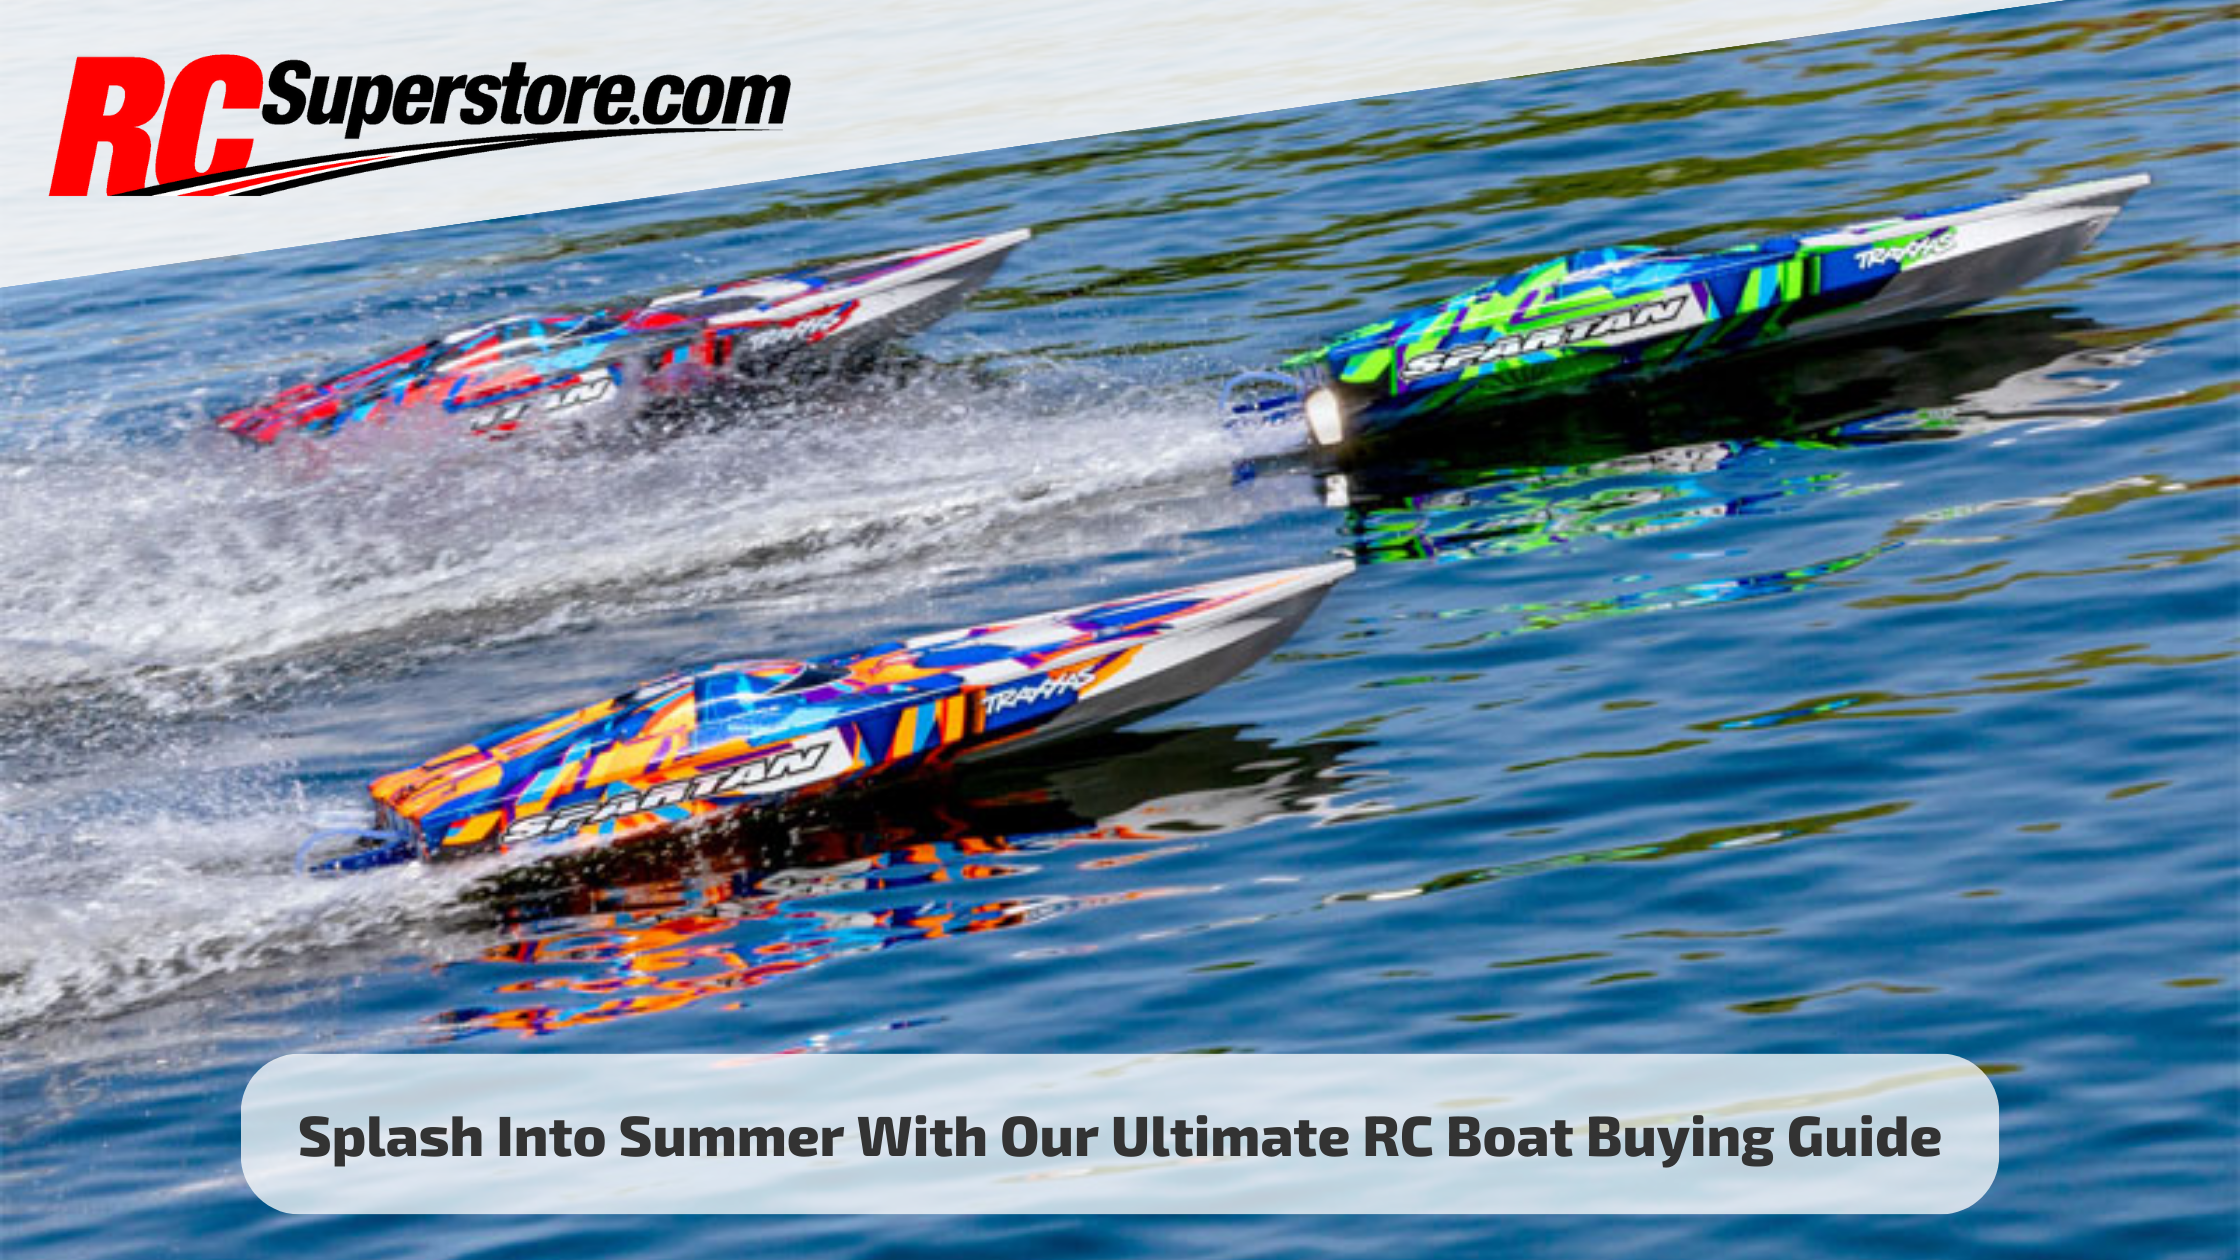 Splash Into Summer With Our Ultimate RC Boat Buying Guide